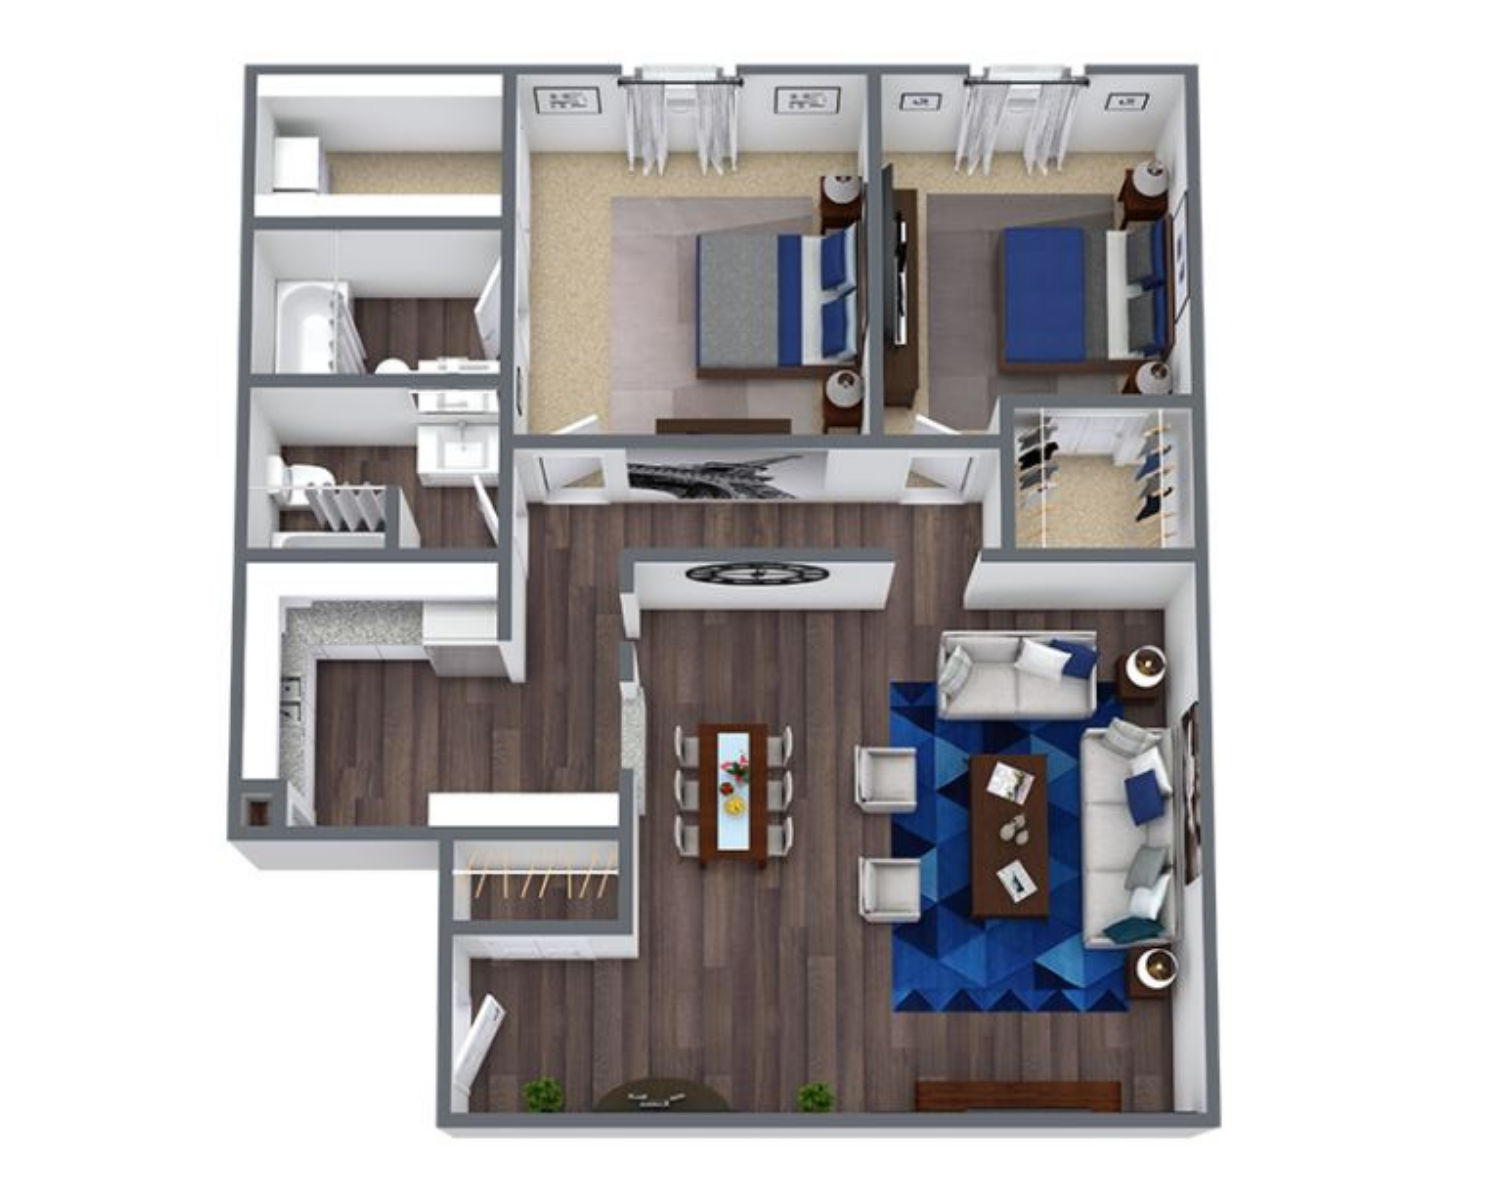 two bed two bath apartment floor plan at 1,100 square feet